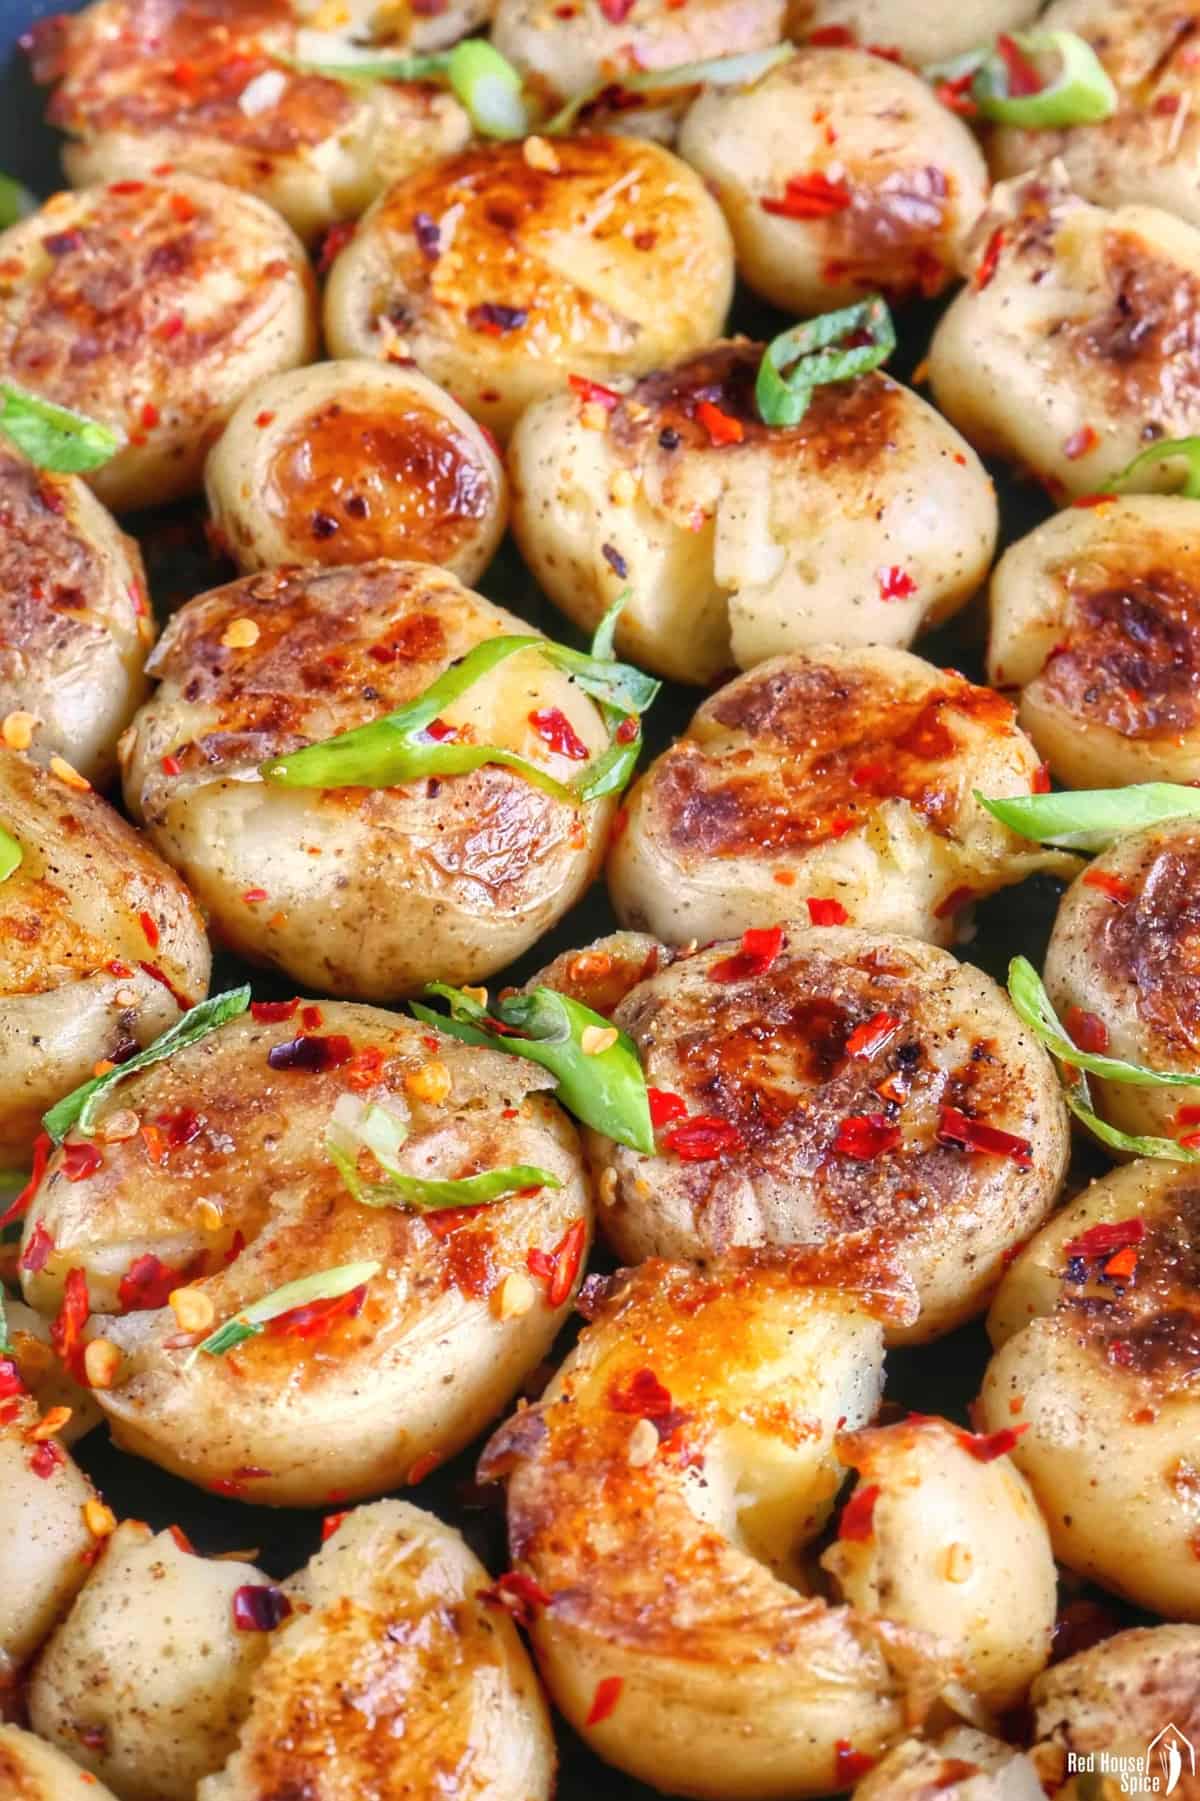 Golden pan-fried baby potatoes garnished with spices and scallions